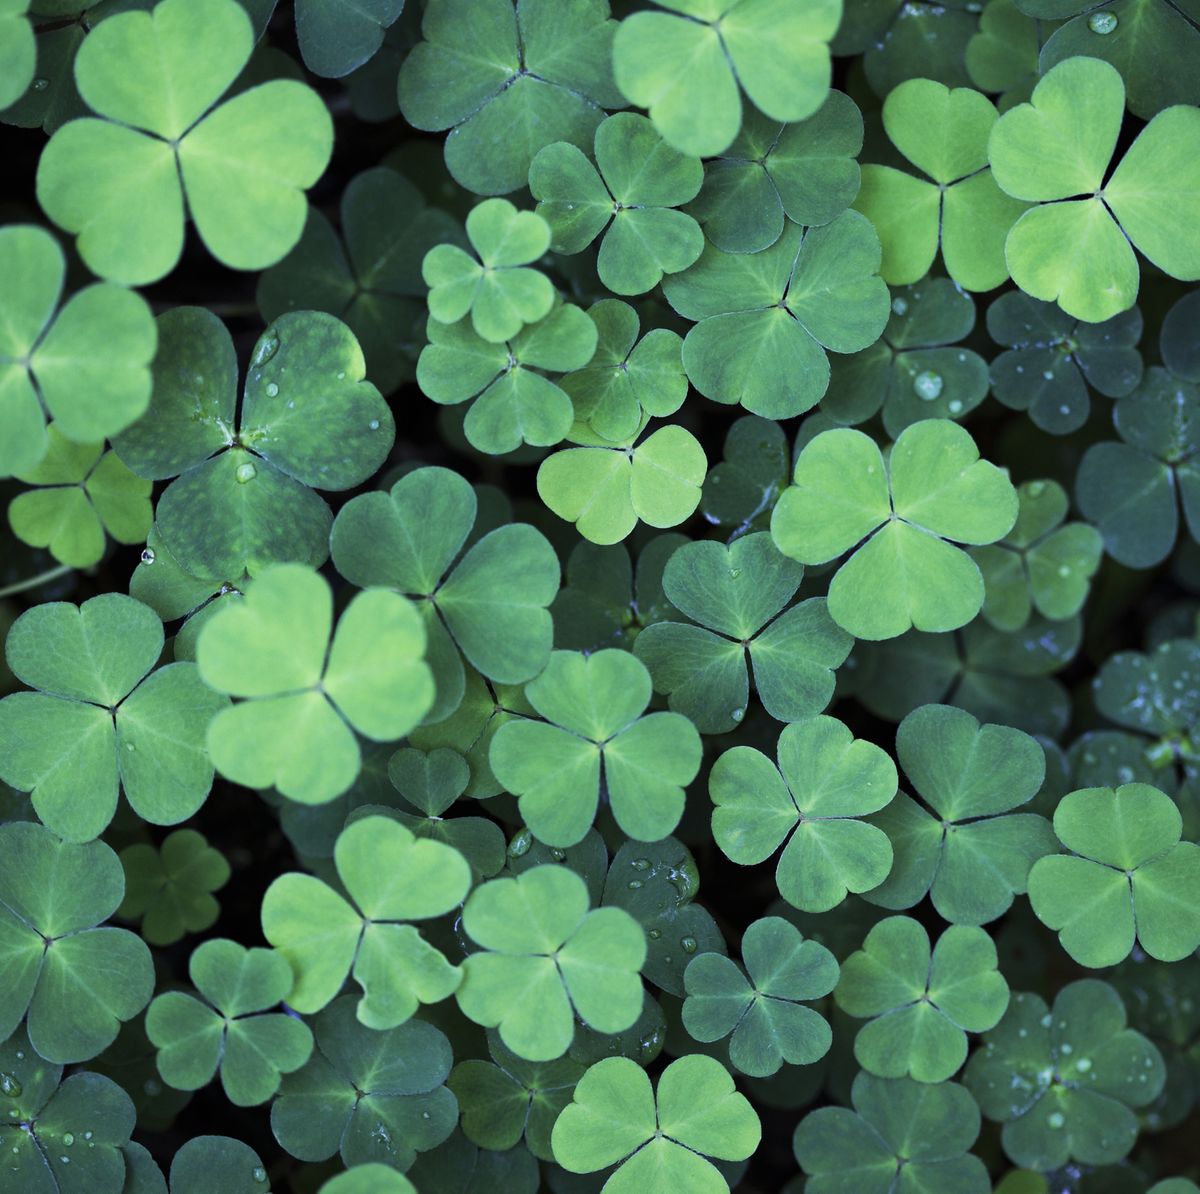 IRISH BLESSING _ St. Patrick's Day Quotes _ For each petal on the shamrock,  this brings a wish your way_ Good health, good luck, and happiness for  today and every day. 